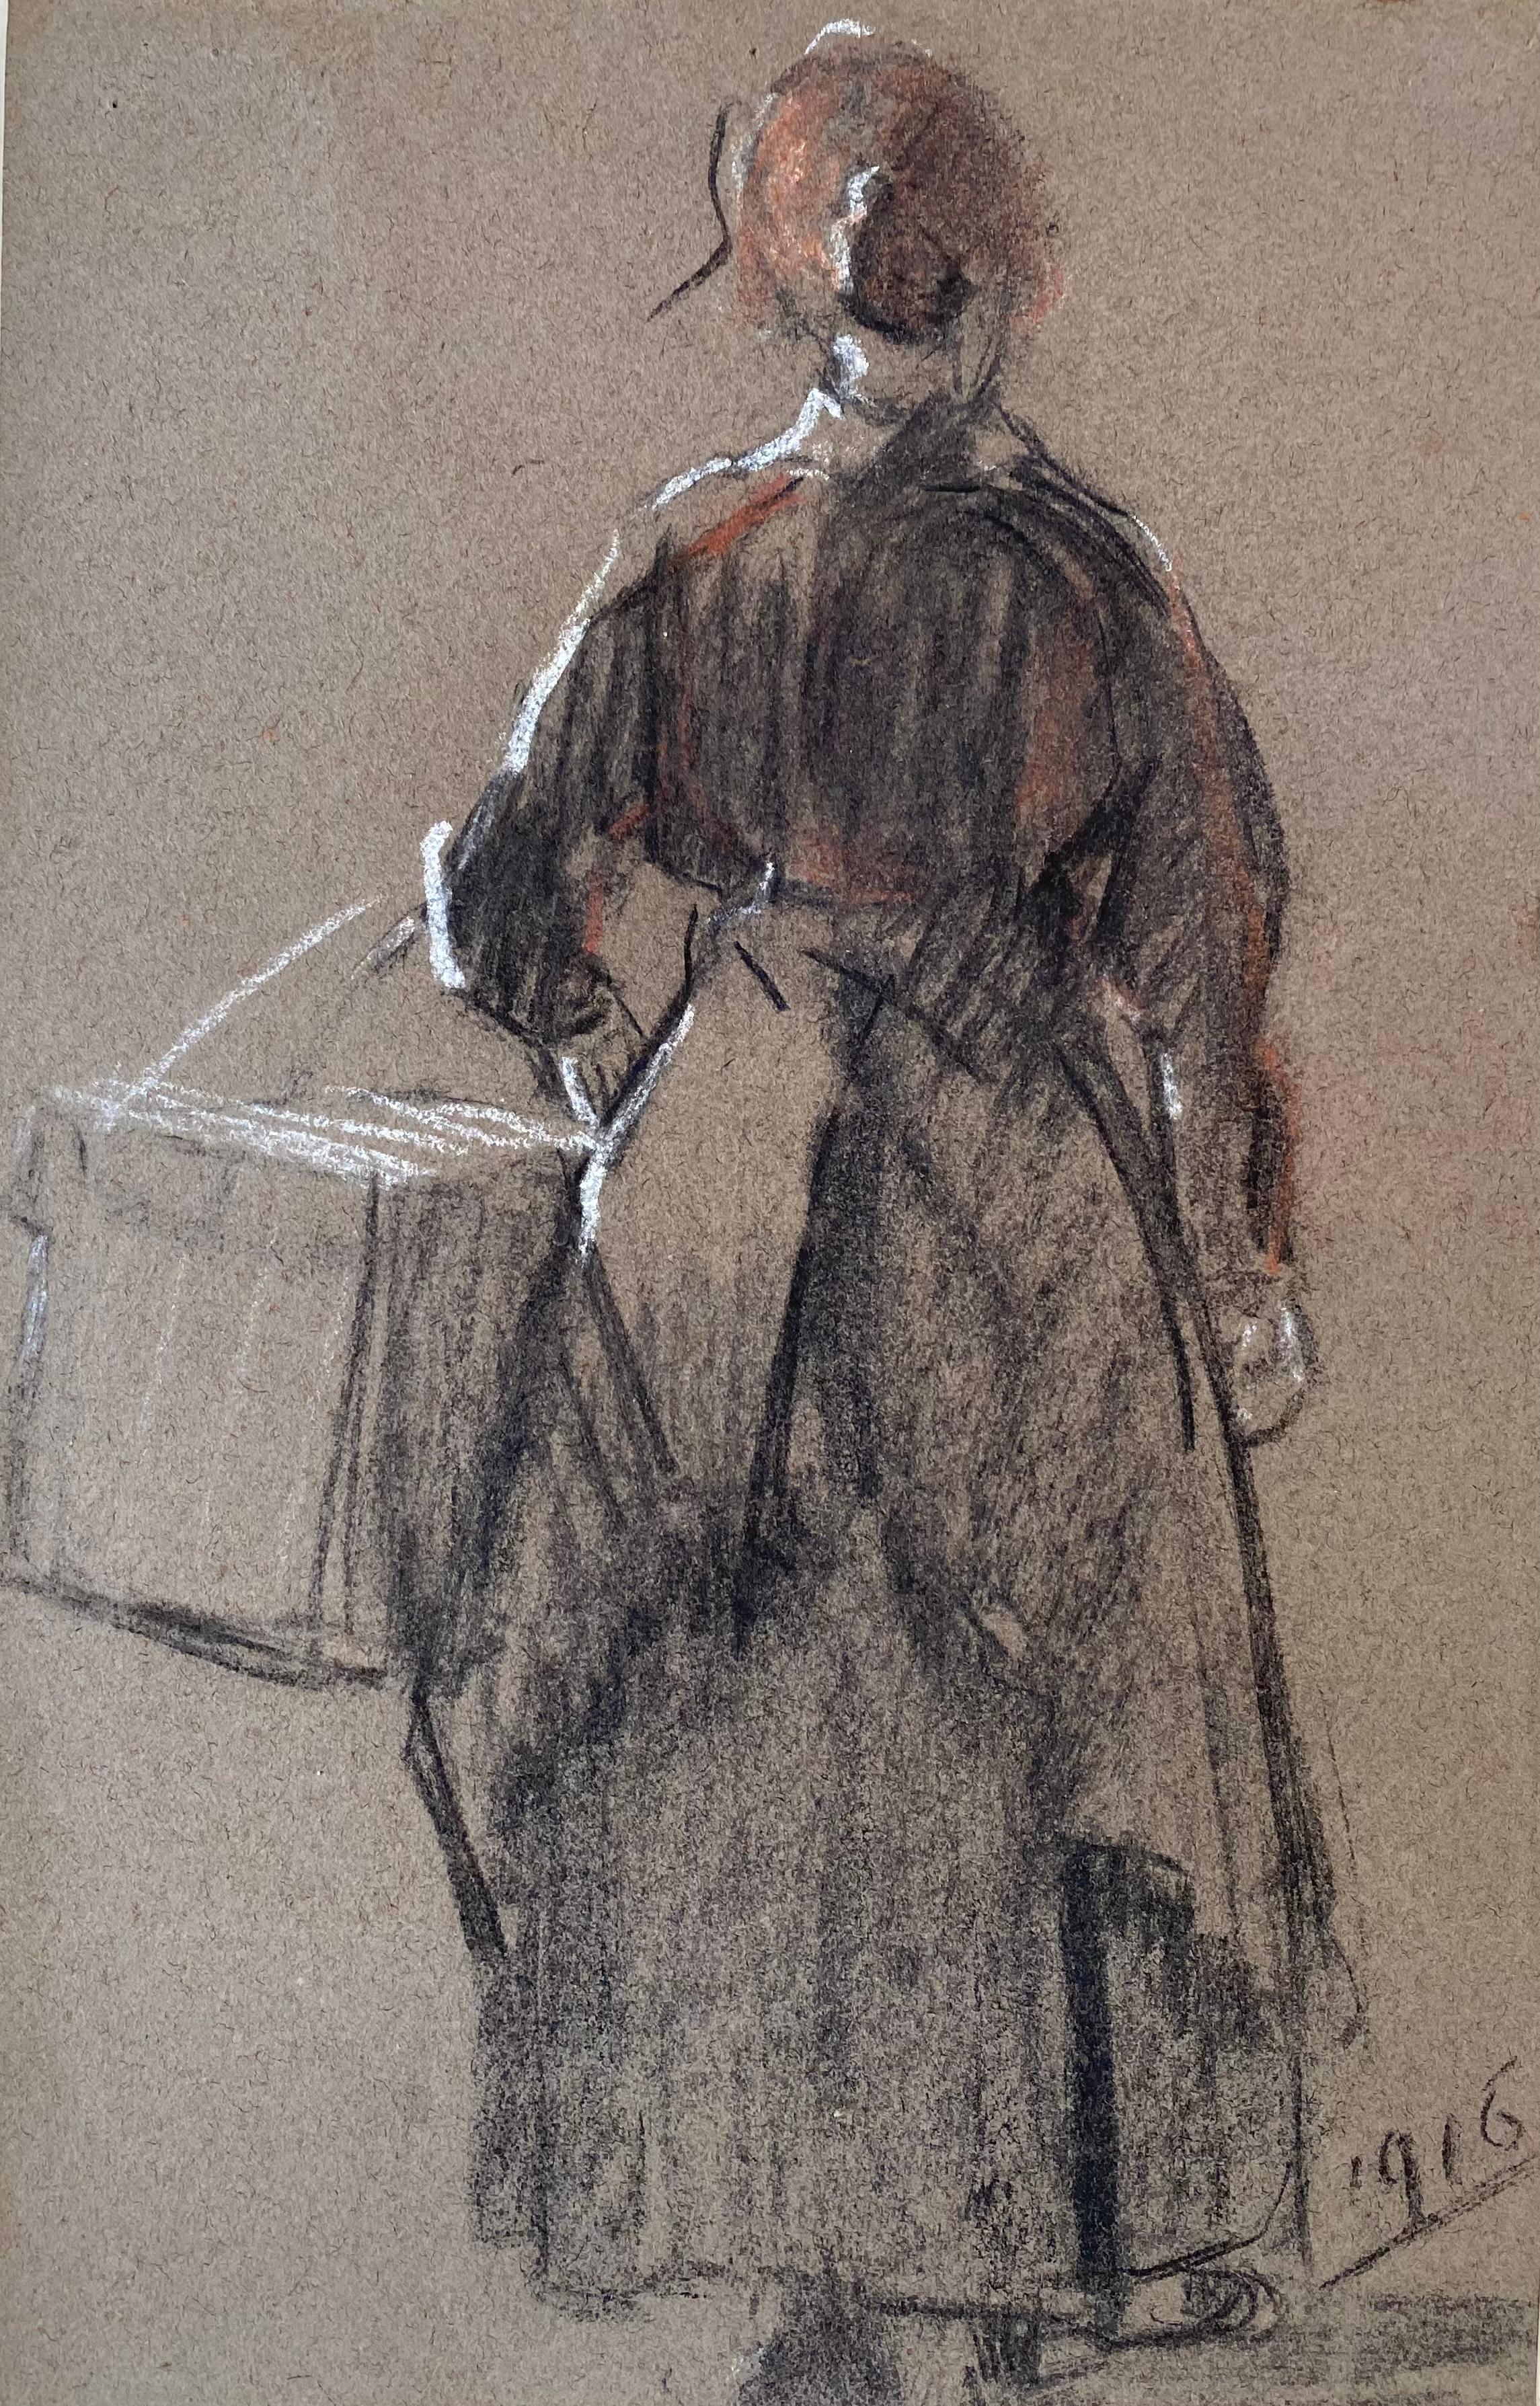 Original drawing of a woman heading to market by the well known American artist, Everett Shinn.  Mixed media work created with charcoal, pastel and gouache. Signed with the artist’s initials lower right and dated 1916. Condition is very good. Under